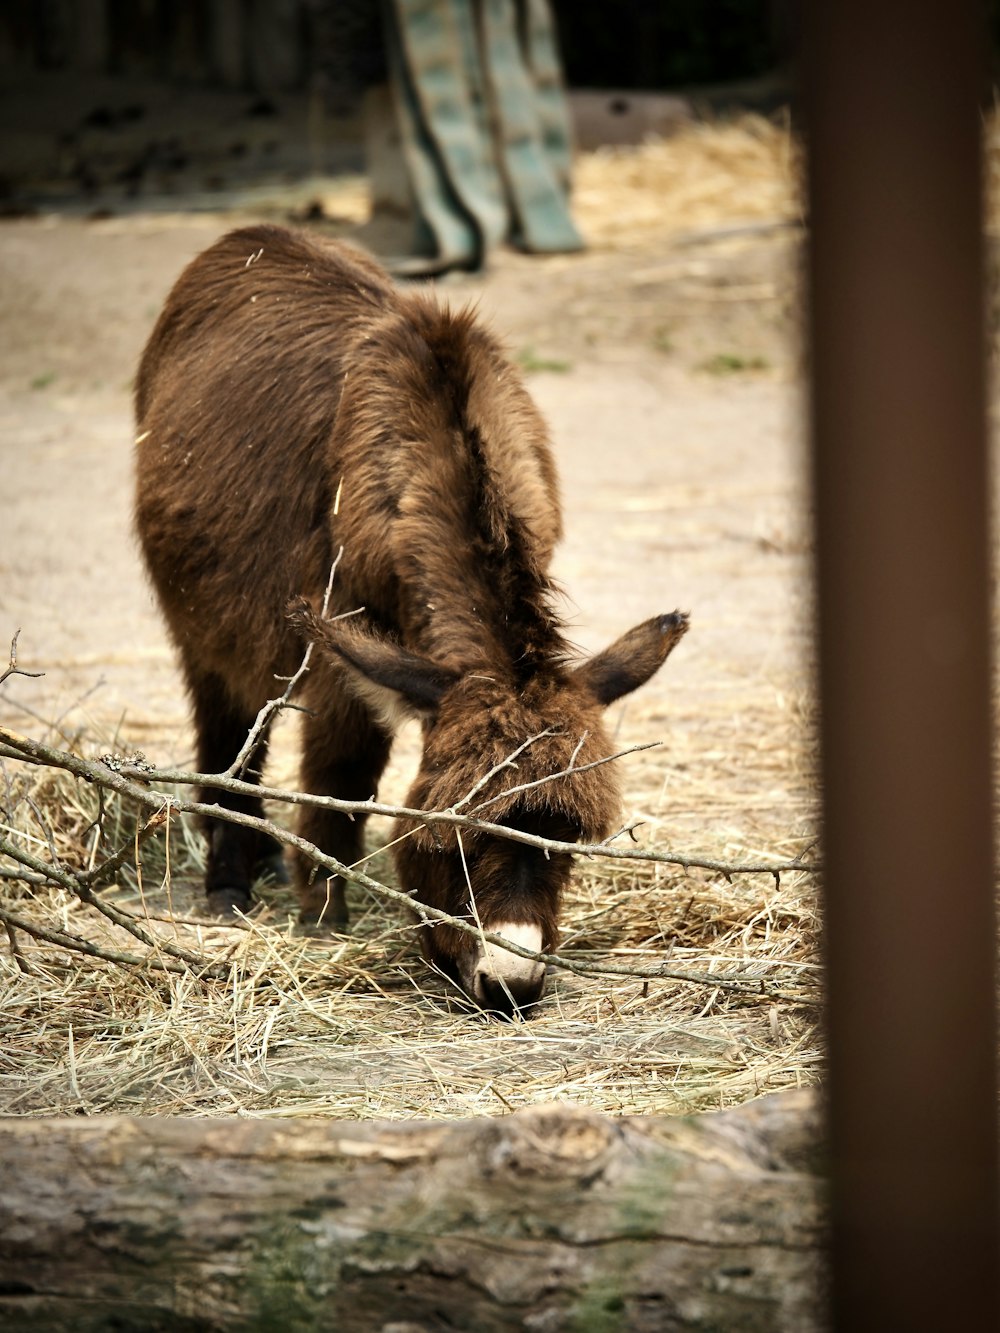 a brown and white animal eating some hay